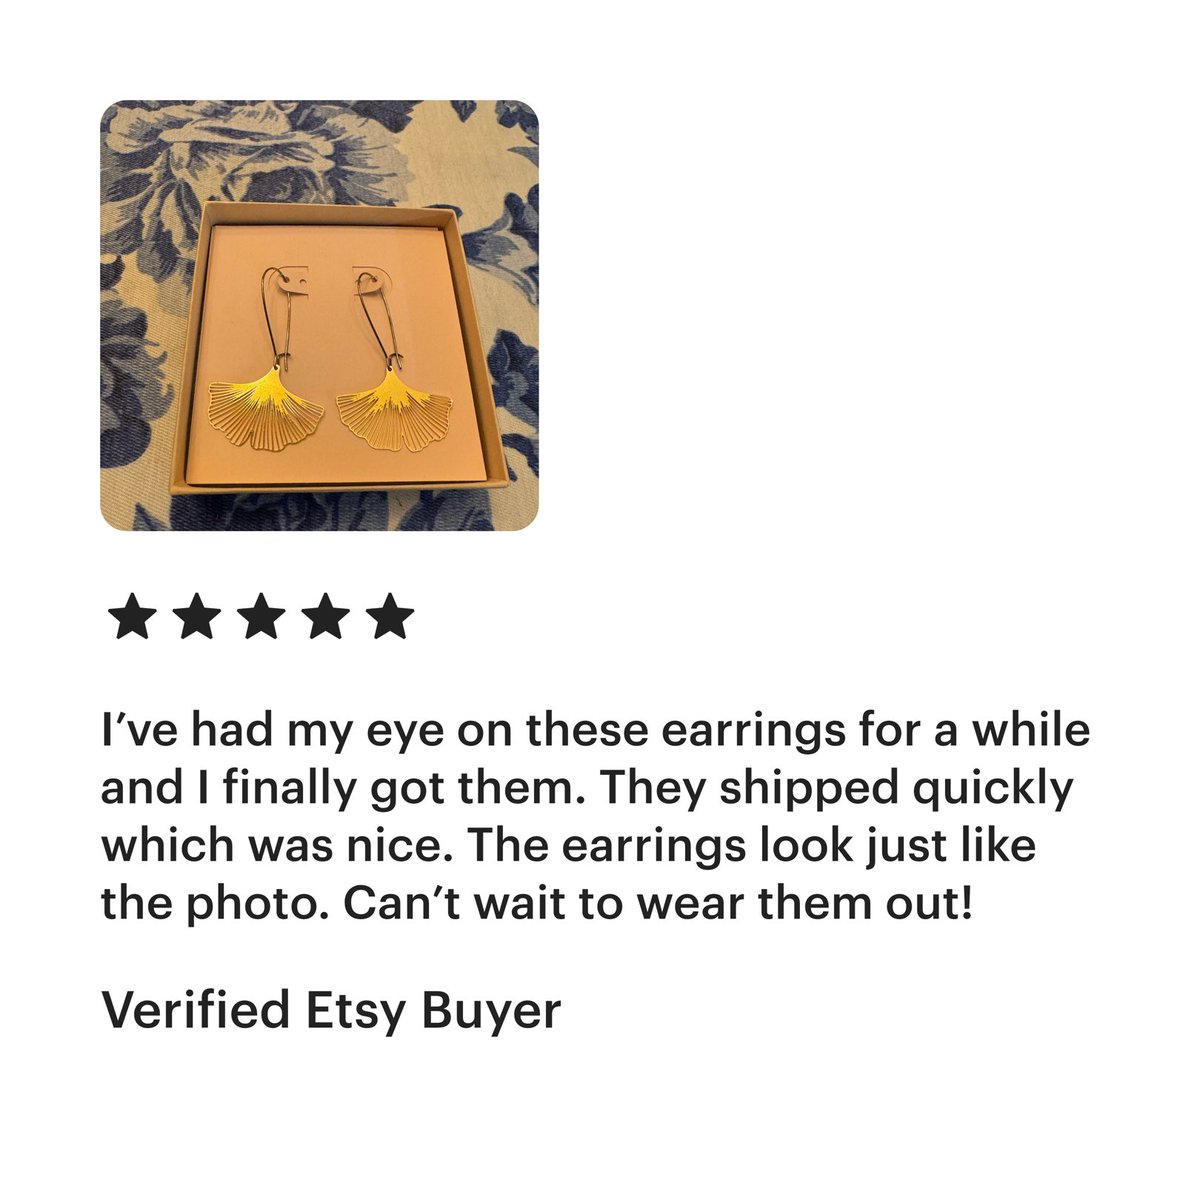 Thanks for the kind review✨😀 #Craftbizparty #MHHSBD #EtsyGifts #handmadejewelry #bobbydazzlersjewely bobbydazzlersjewelry.etsy.com